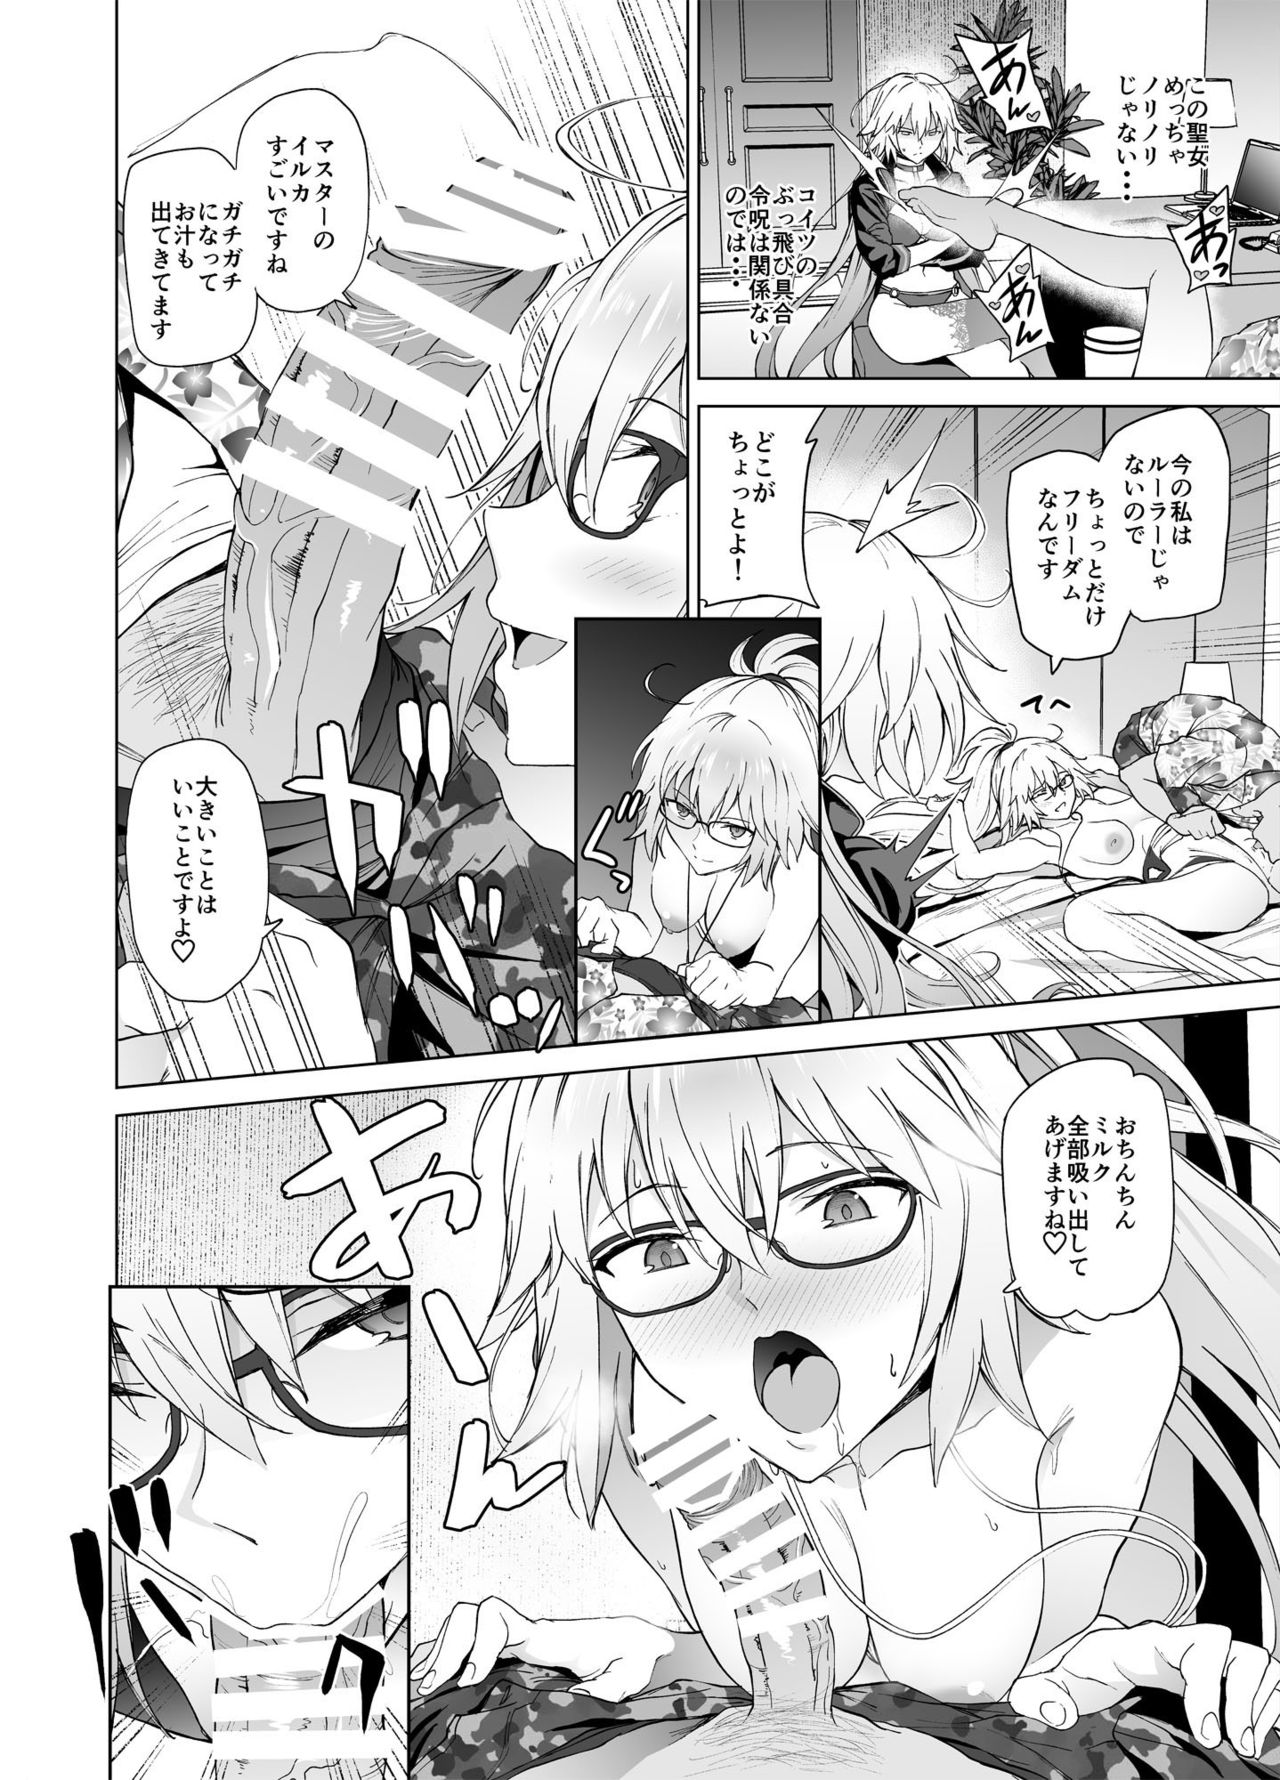 [EXTENDED PART (Endo Yoshiki)] Jeanne W (Fate/Grand Order) [Digital] page 11 full